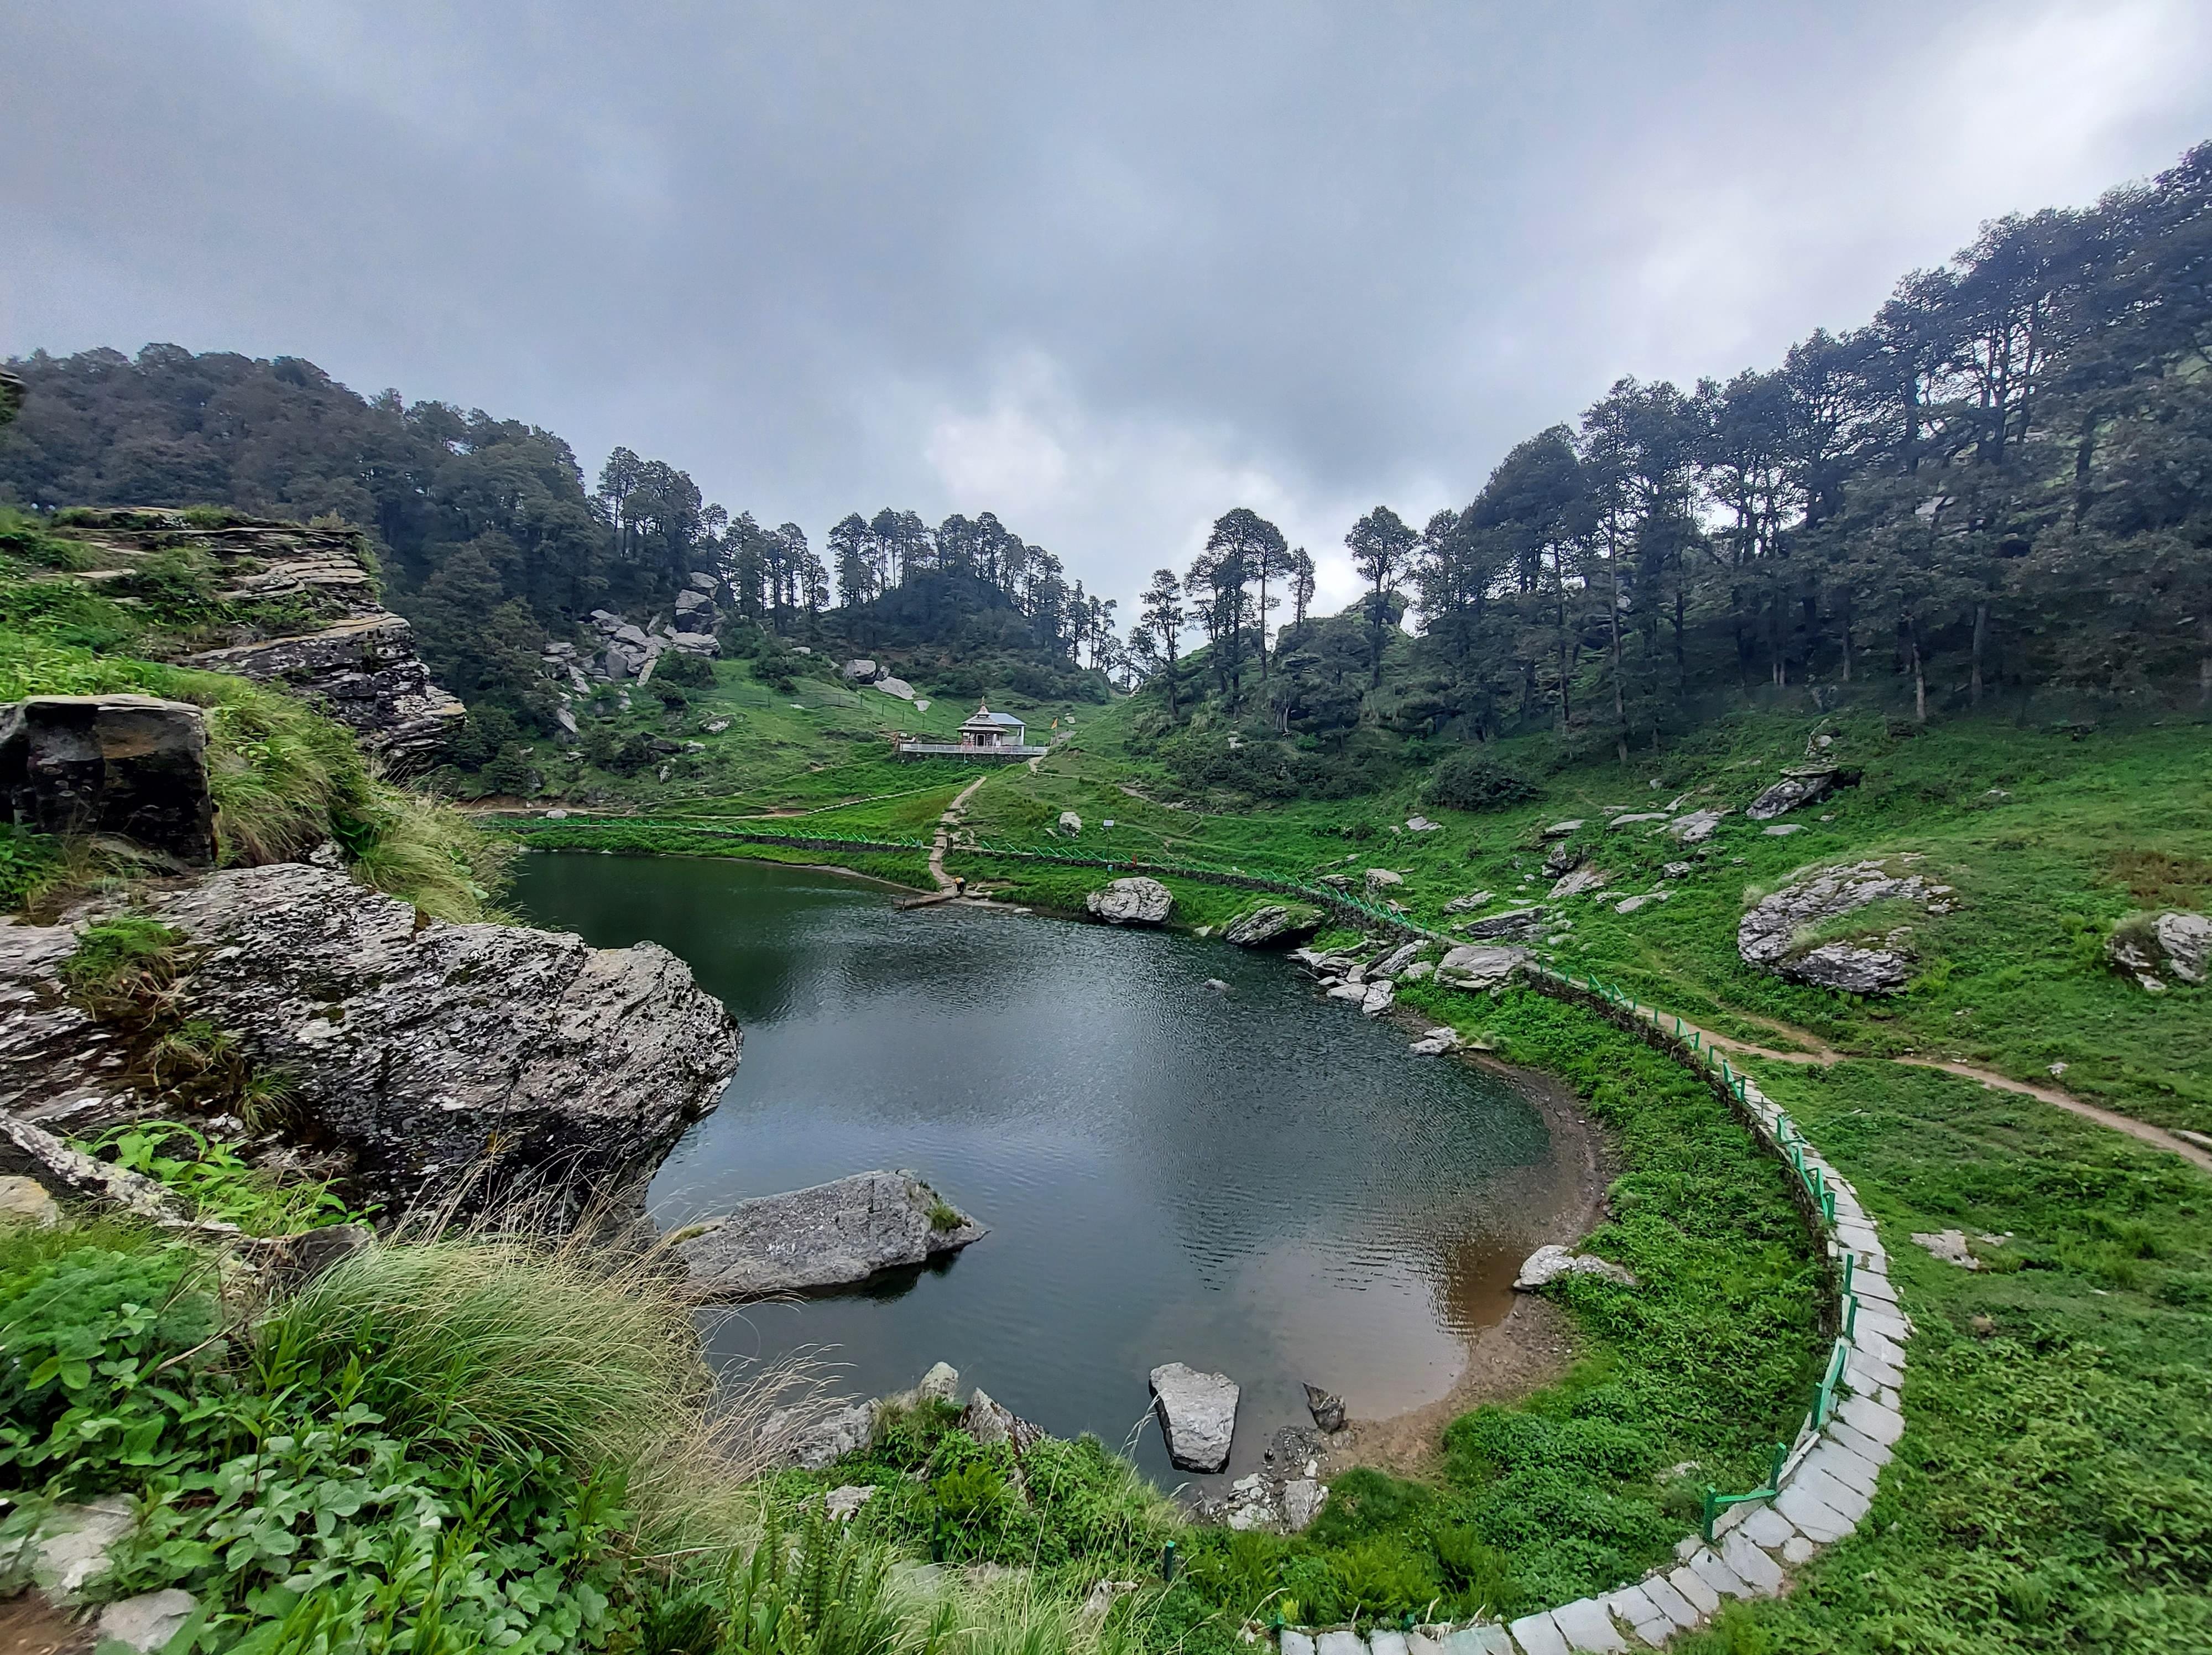 Dhanaulti Packages from Bhopal | Get Upto 40% Off